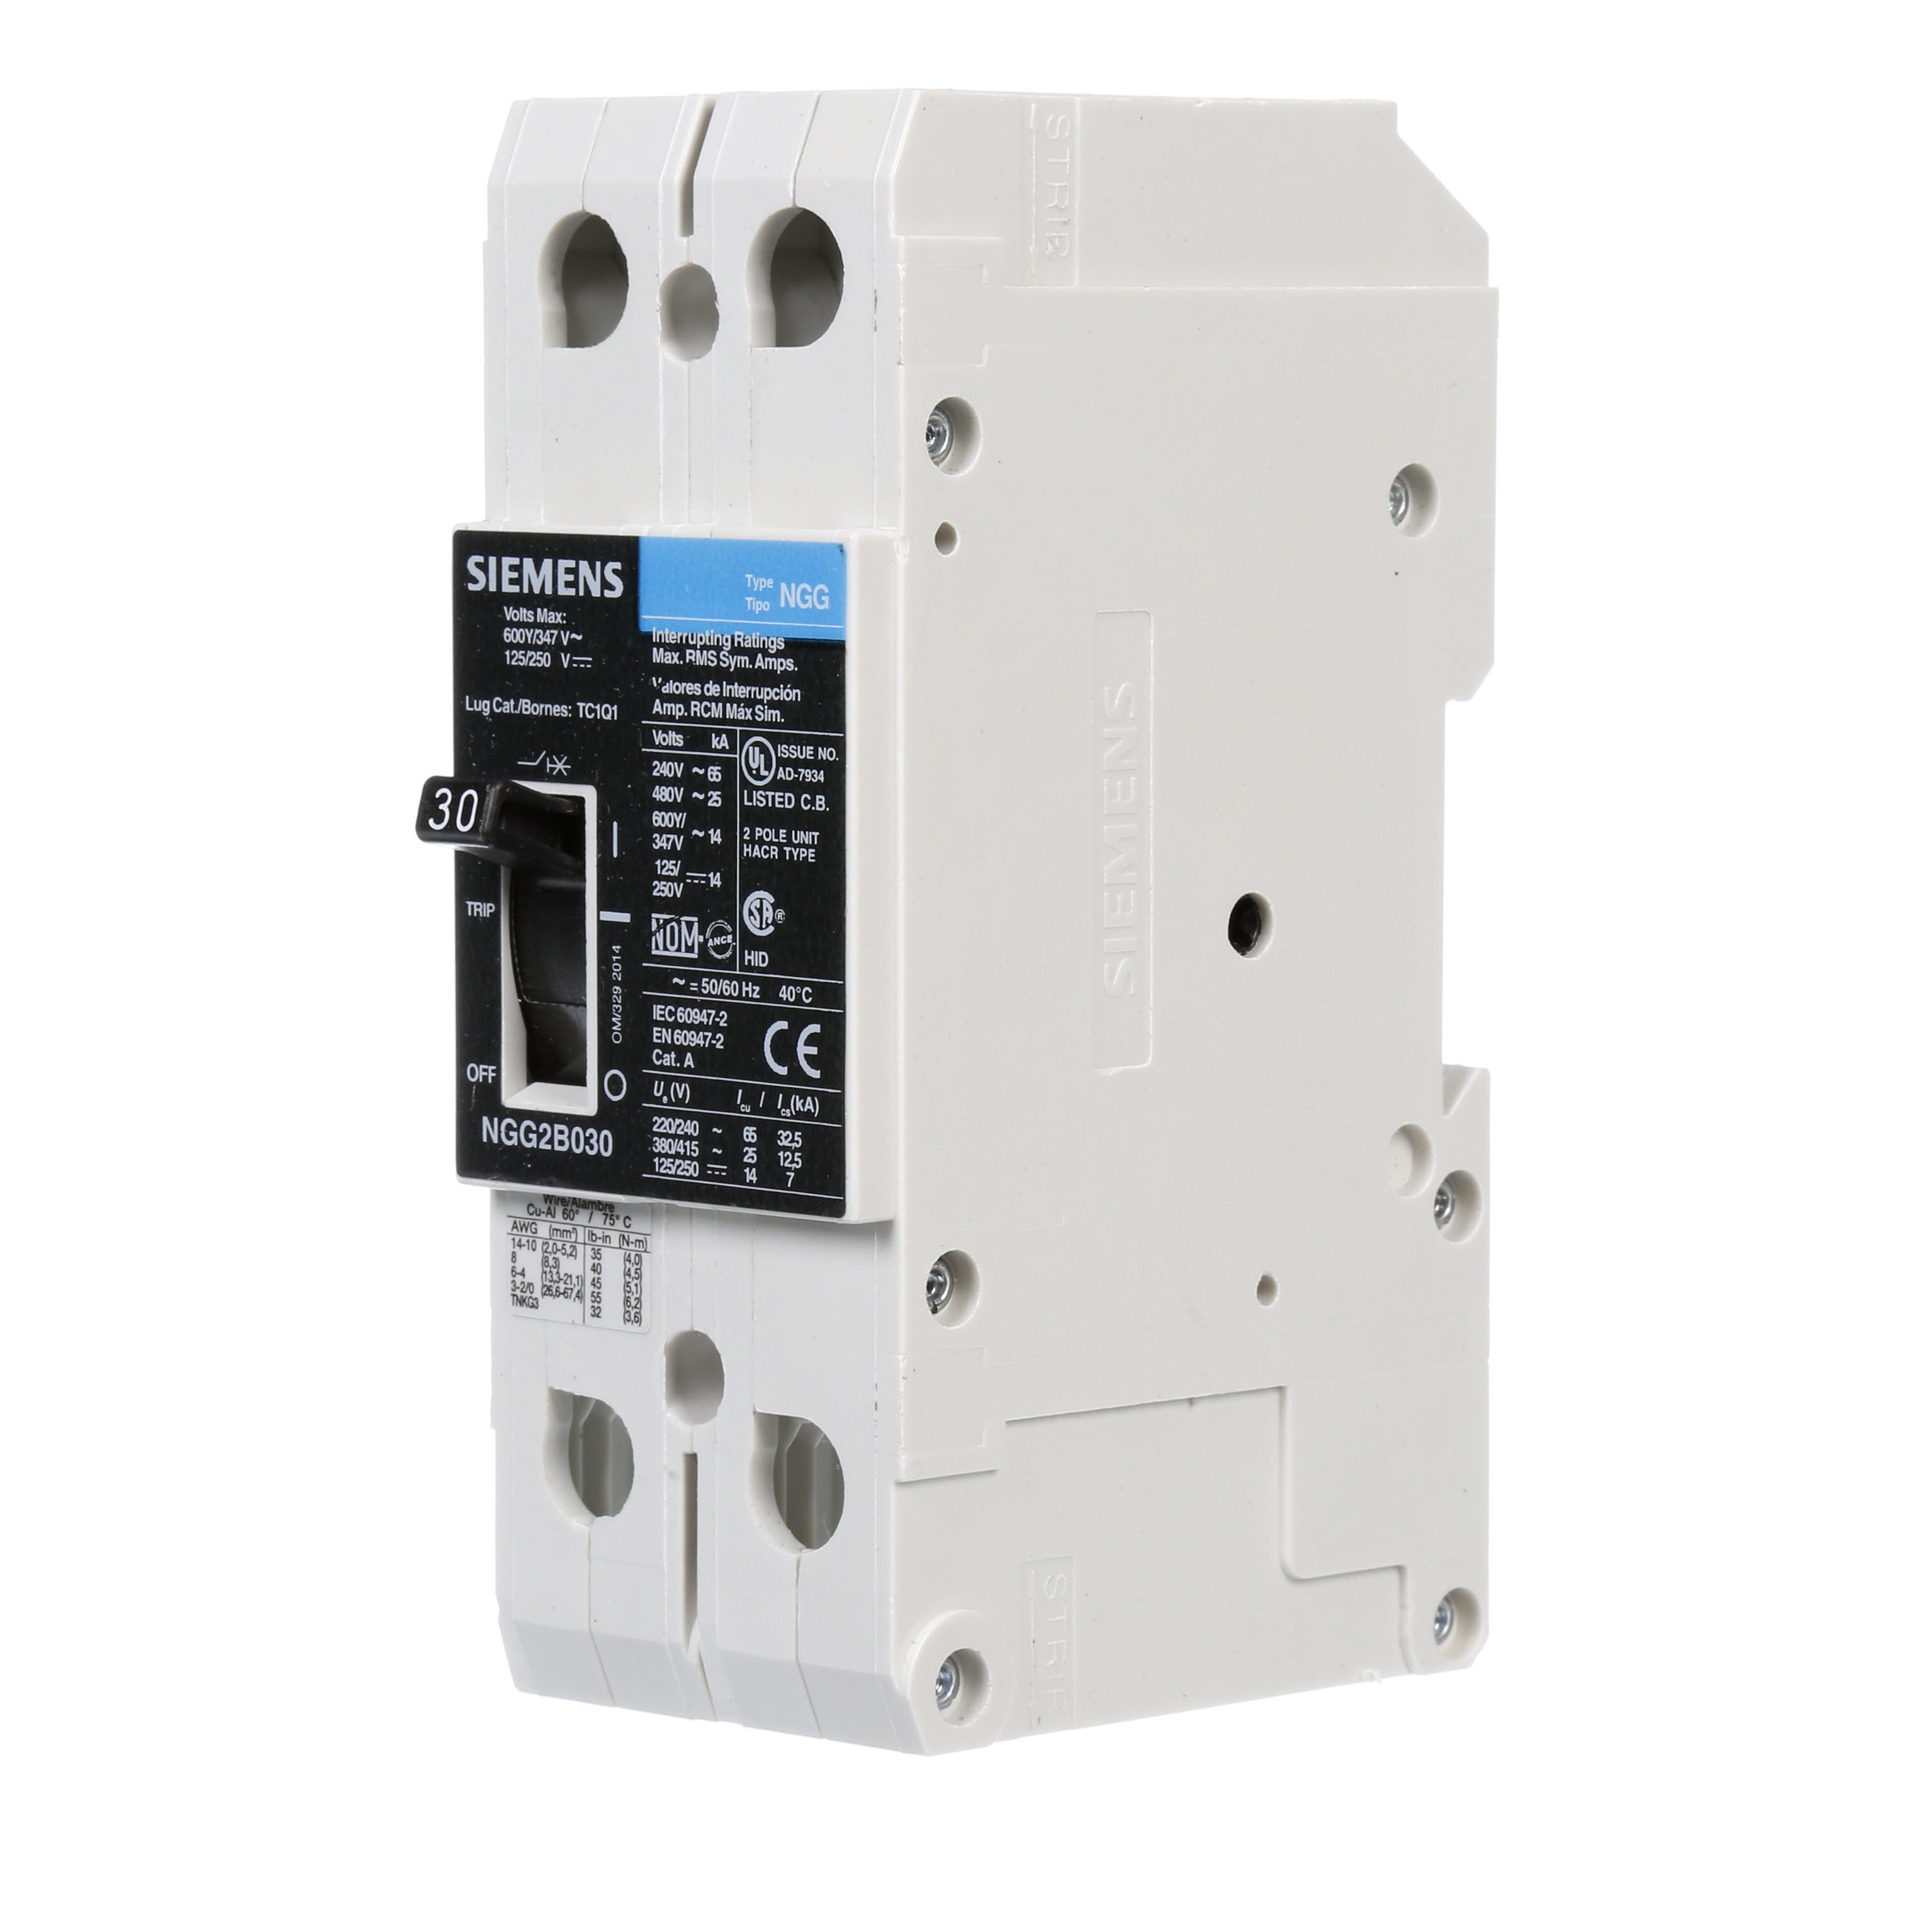 SIEMENS LOW VOLTAGE G FRAME CIRCUIT BREAKER WITH THERMAL - MAGNETIC TRIP. UL LISTED NGG FRAME WITH STANDARD BREAKING CAPACITY. 30A 2-POLE (14KAIC AT 600Y/347V)(25KAIC AT 480V). SPECIAL FEATURES MOUNTS ON DIN RAIL / SCREW, NO LUGS. DIMENSIONS (W x H x D) IN 2 x 5.4 x 2.8.